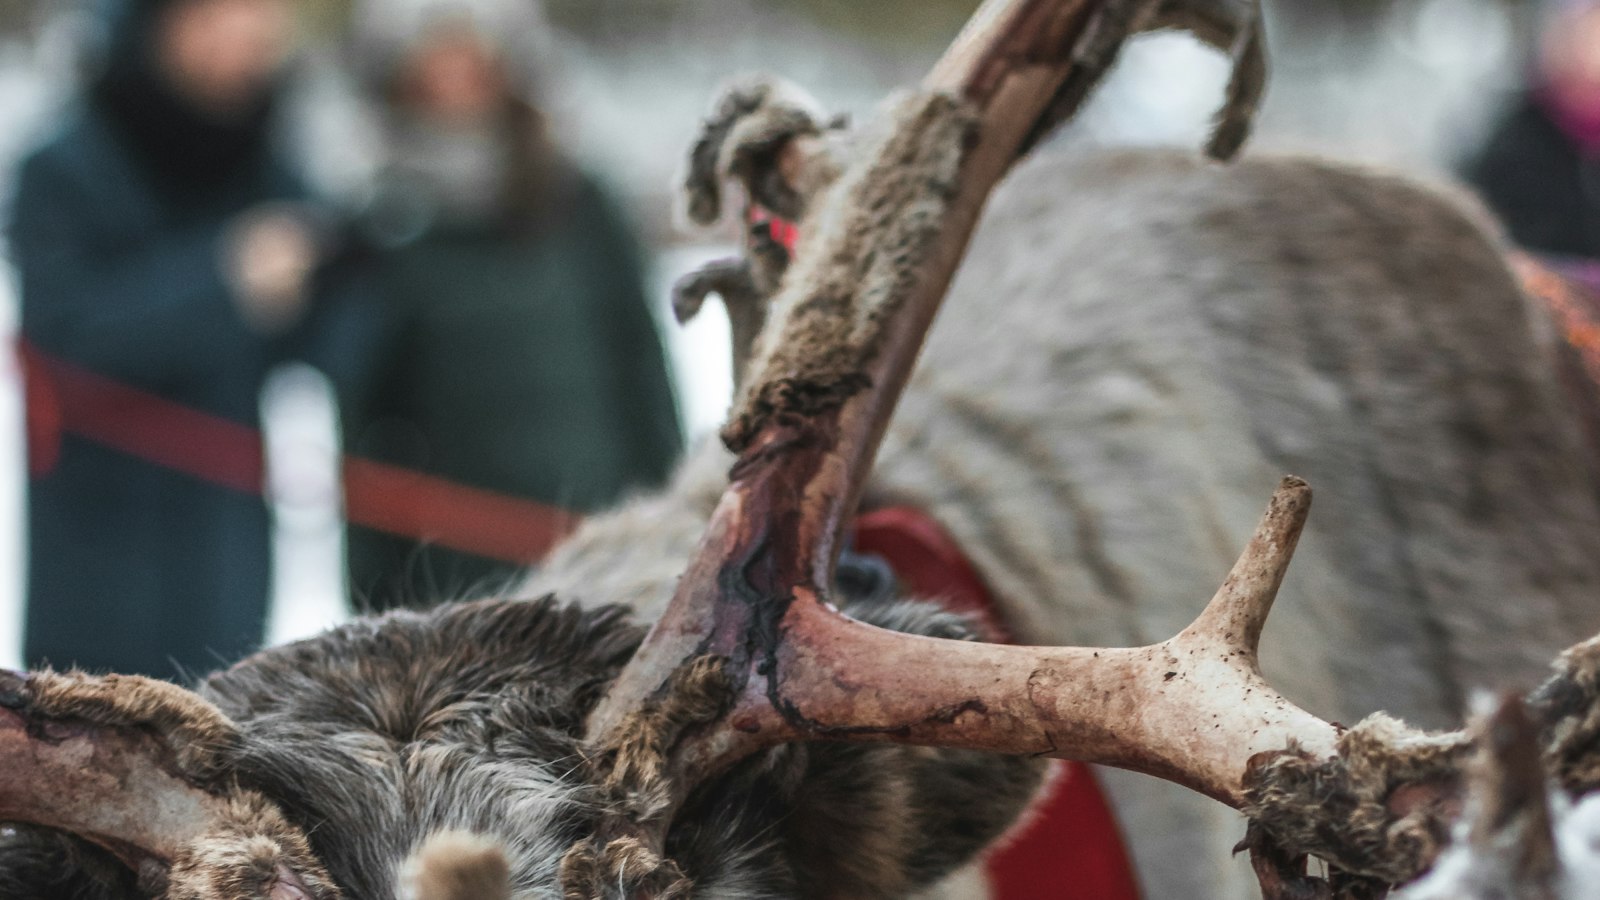 Chasing Santa Claus and Reindeer Sleigh Rides: Festive Delights in Finnish Lapland